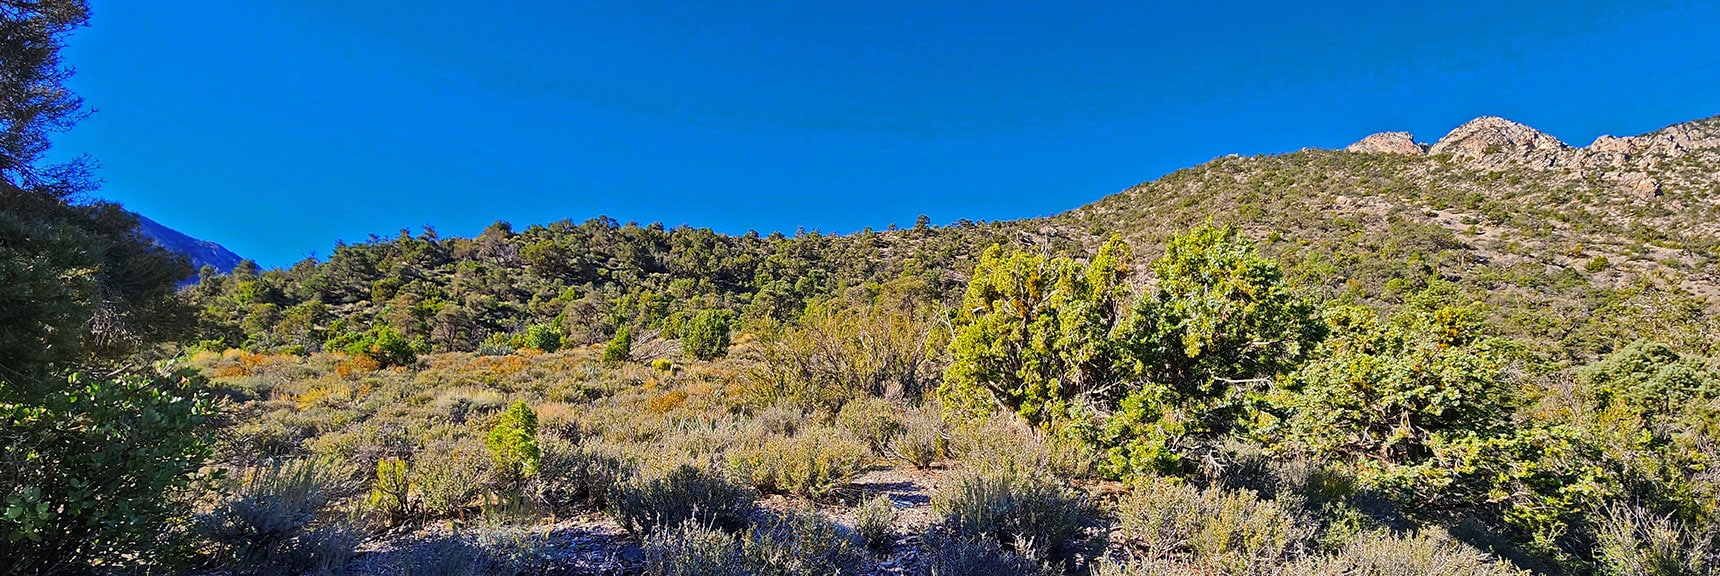 Escaping Thick Brush in the Lower Canyon By Ascending the Ridgeline Above to the South | Switchback Spring Ridge | Red Rock Canyon, Nevada